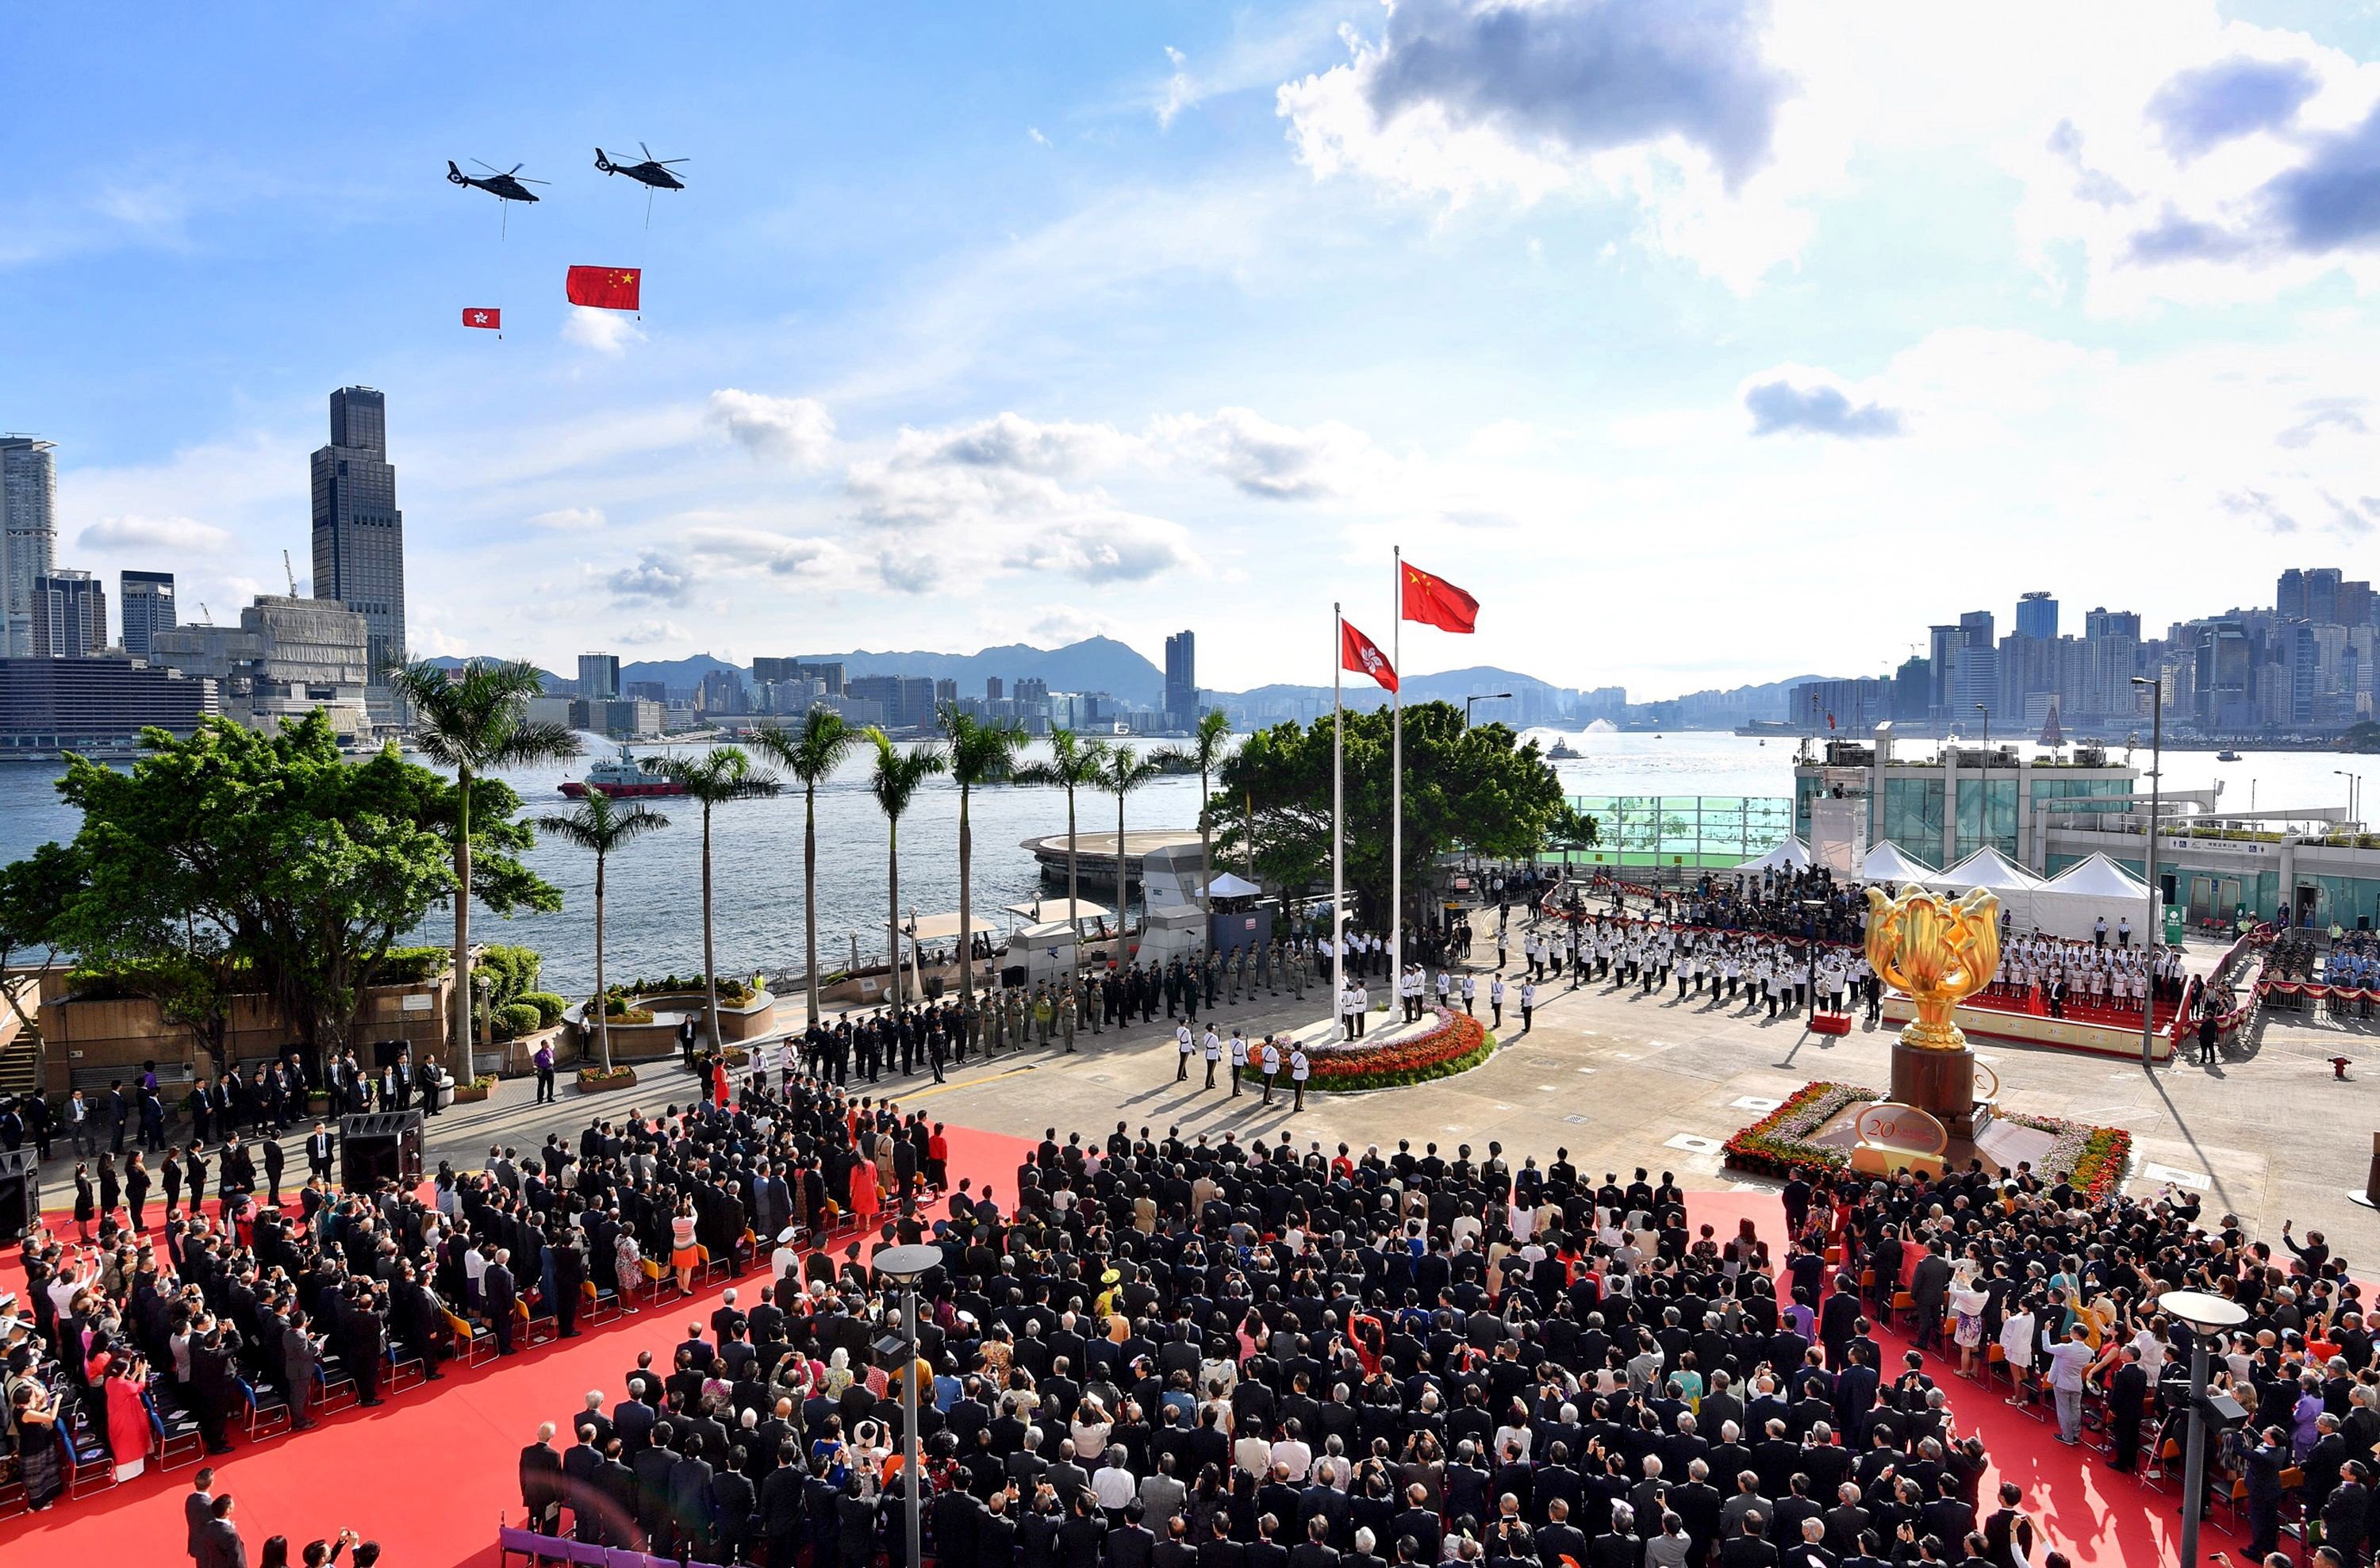 The Hong Kong government says thunderstorms could force the July 1 ceremony indoors, in contrast to the 20th anniversary event, which was basked in sunshine. Photo: AFP / Information Services Department